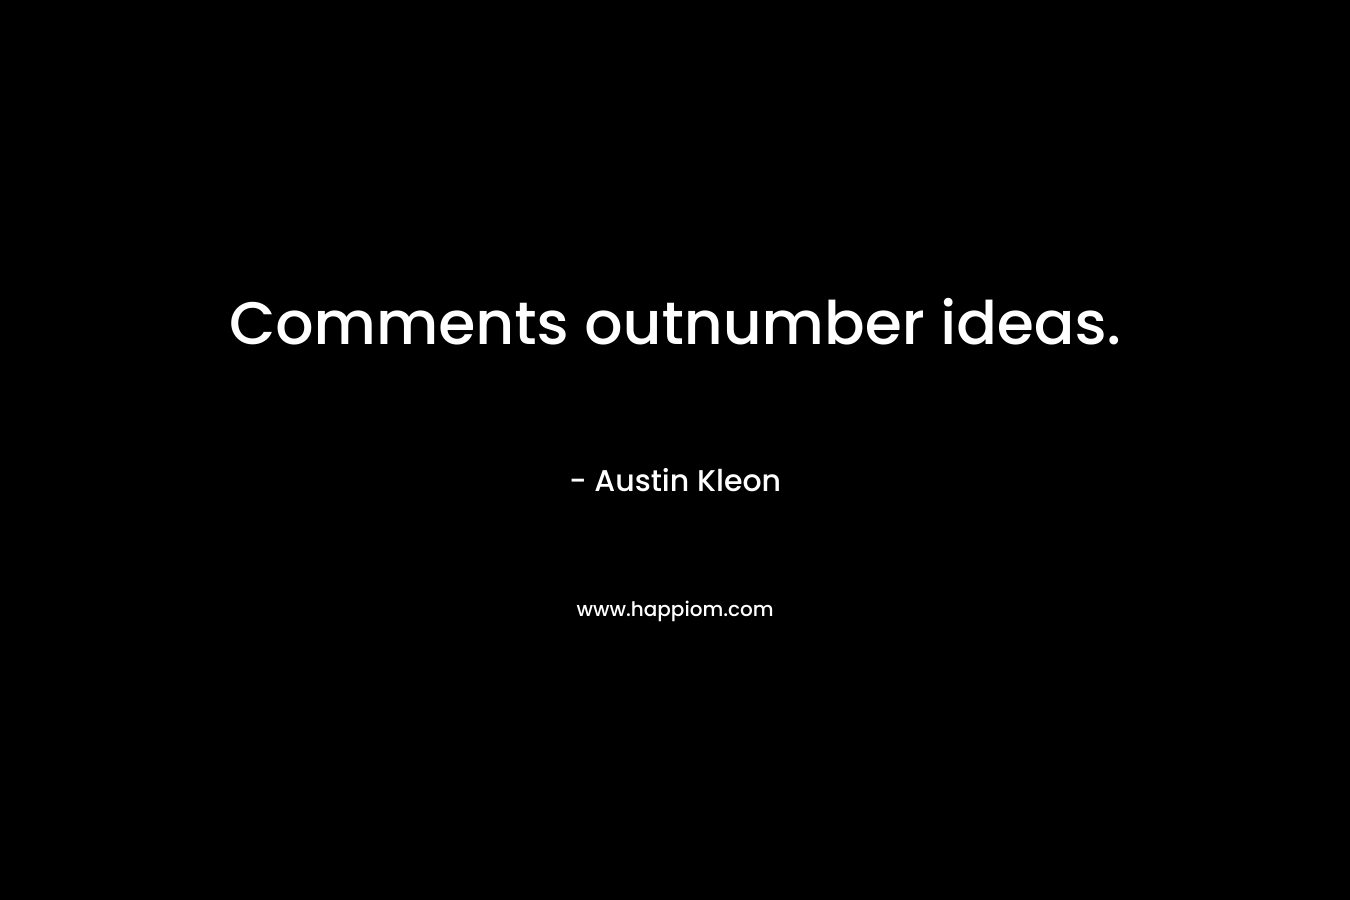 Comments outnumber ideas.